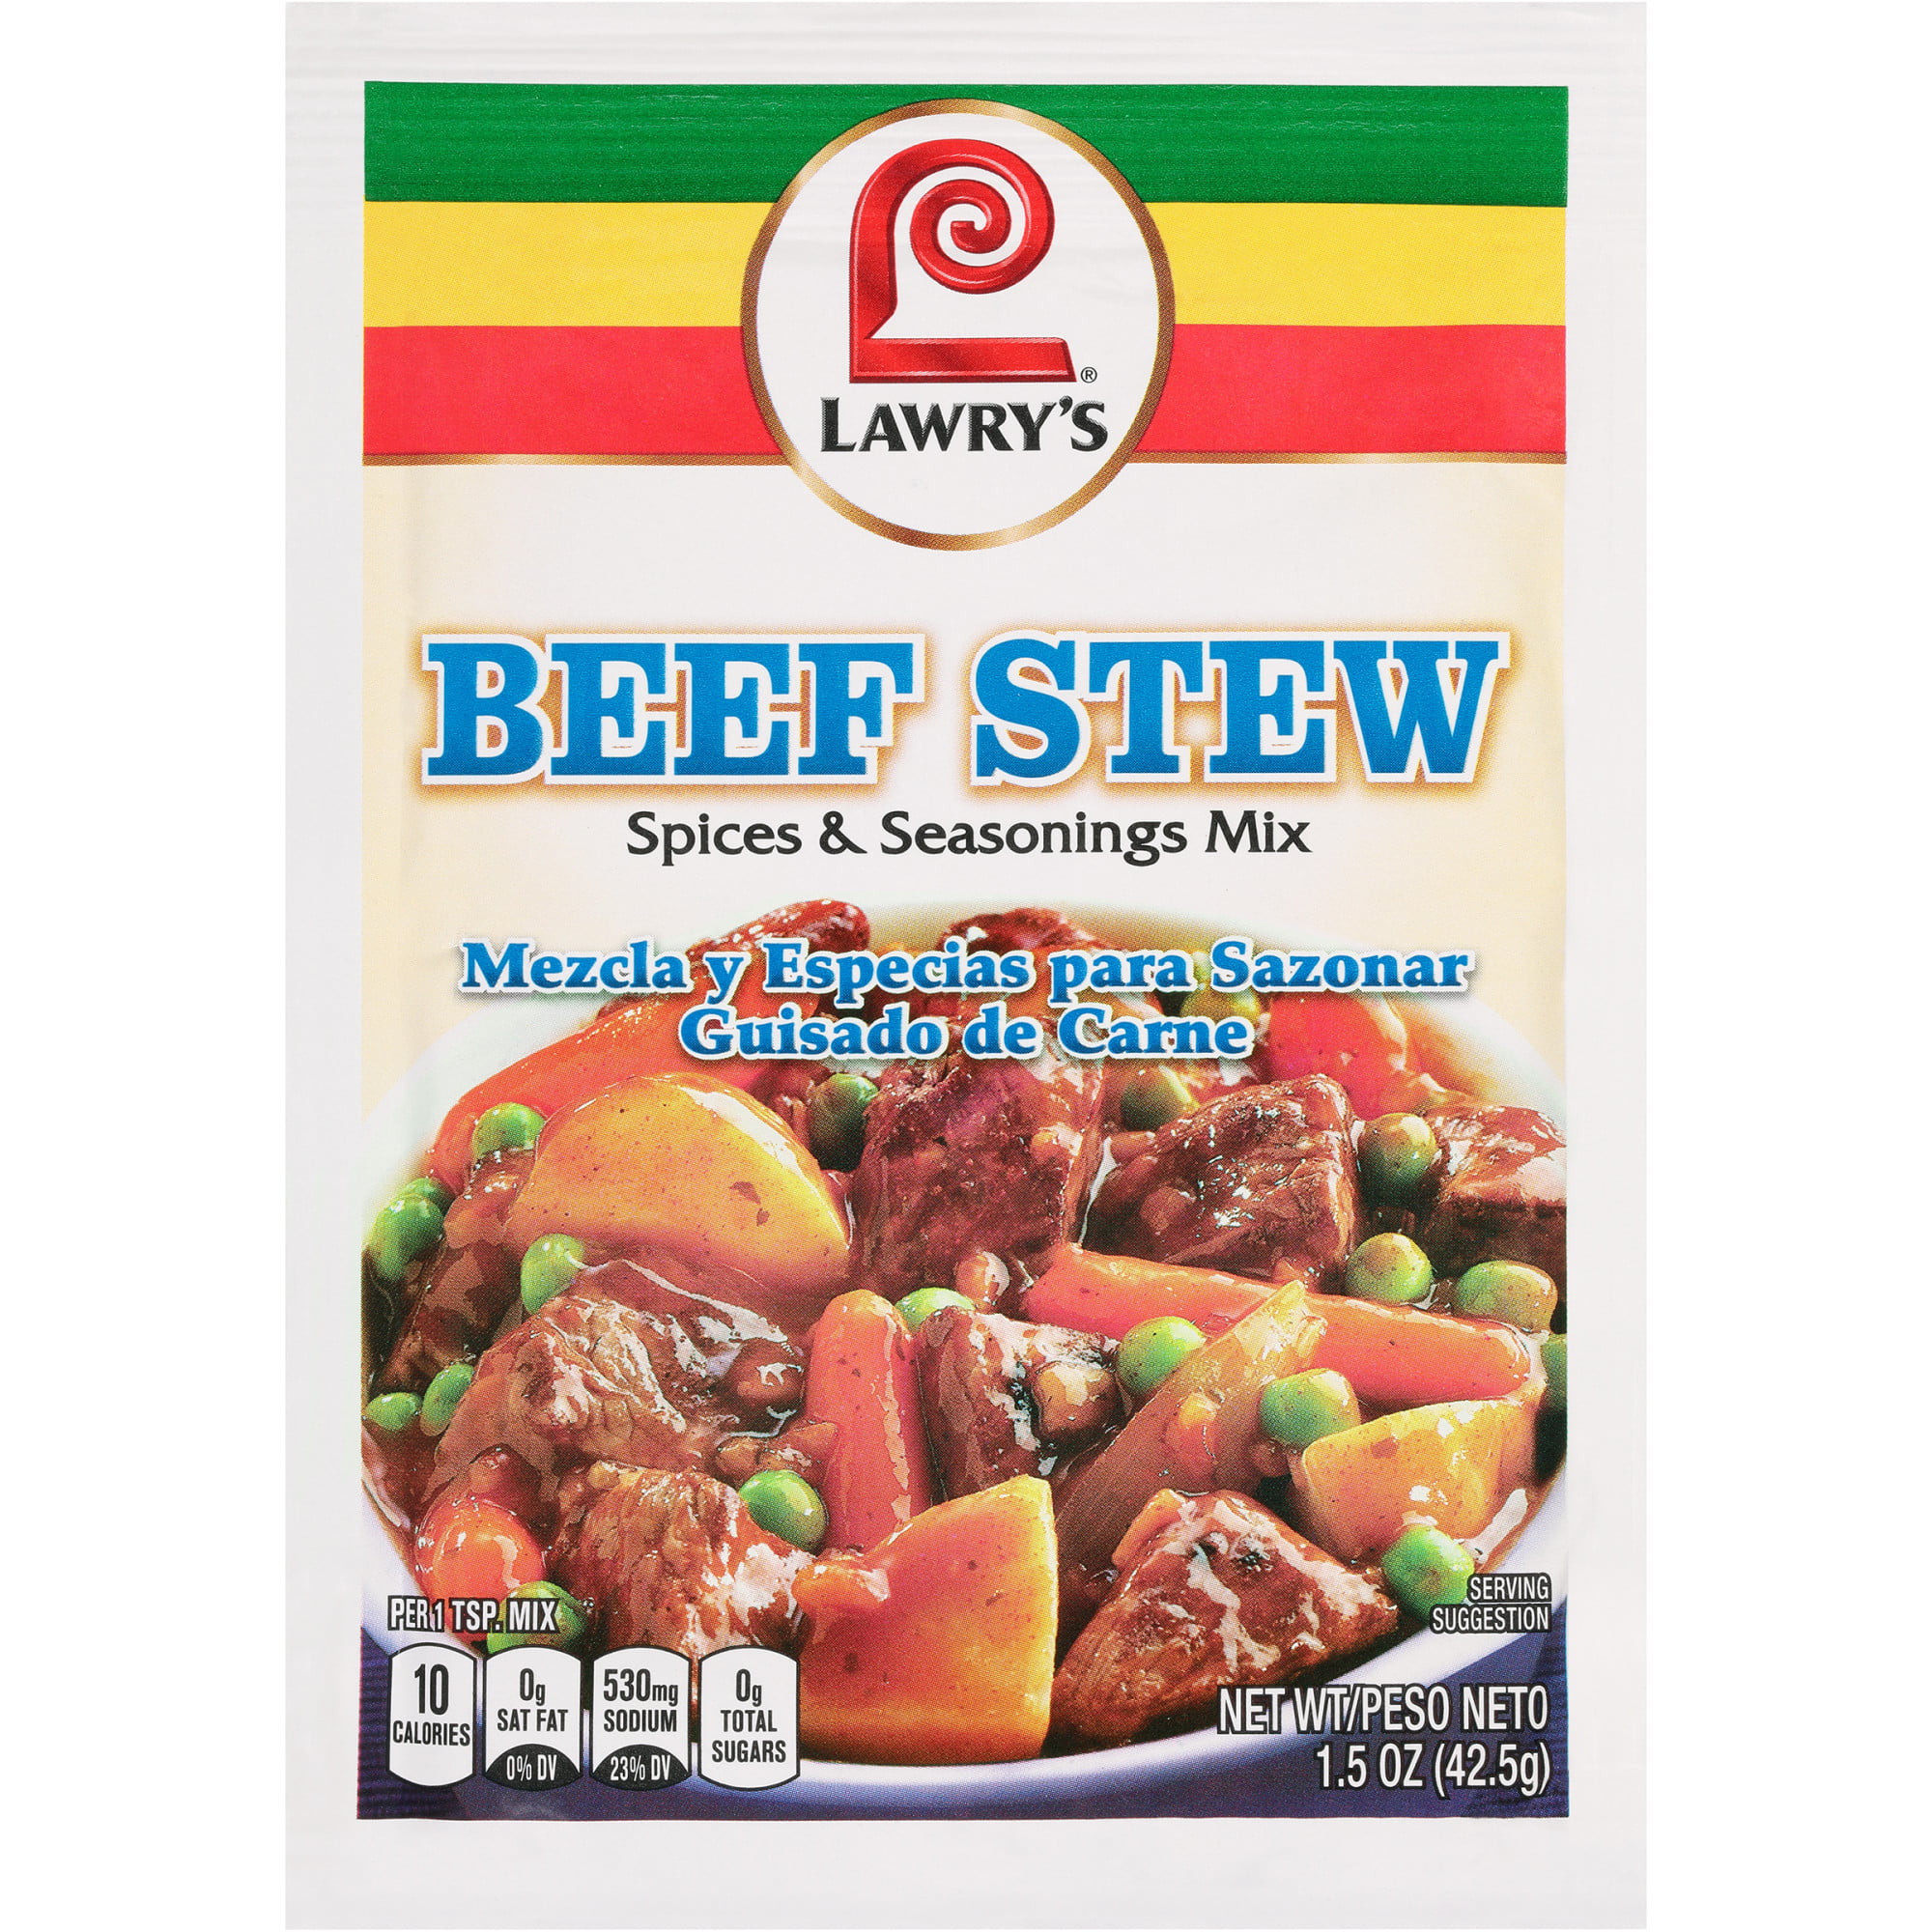 Beef stew og What Cut